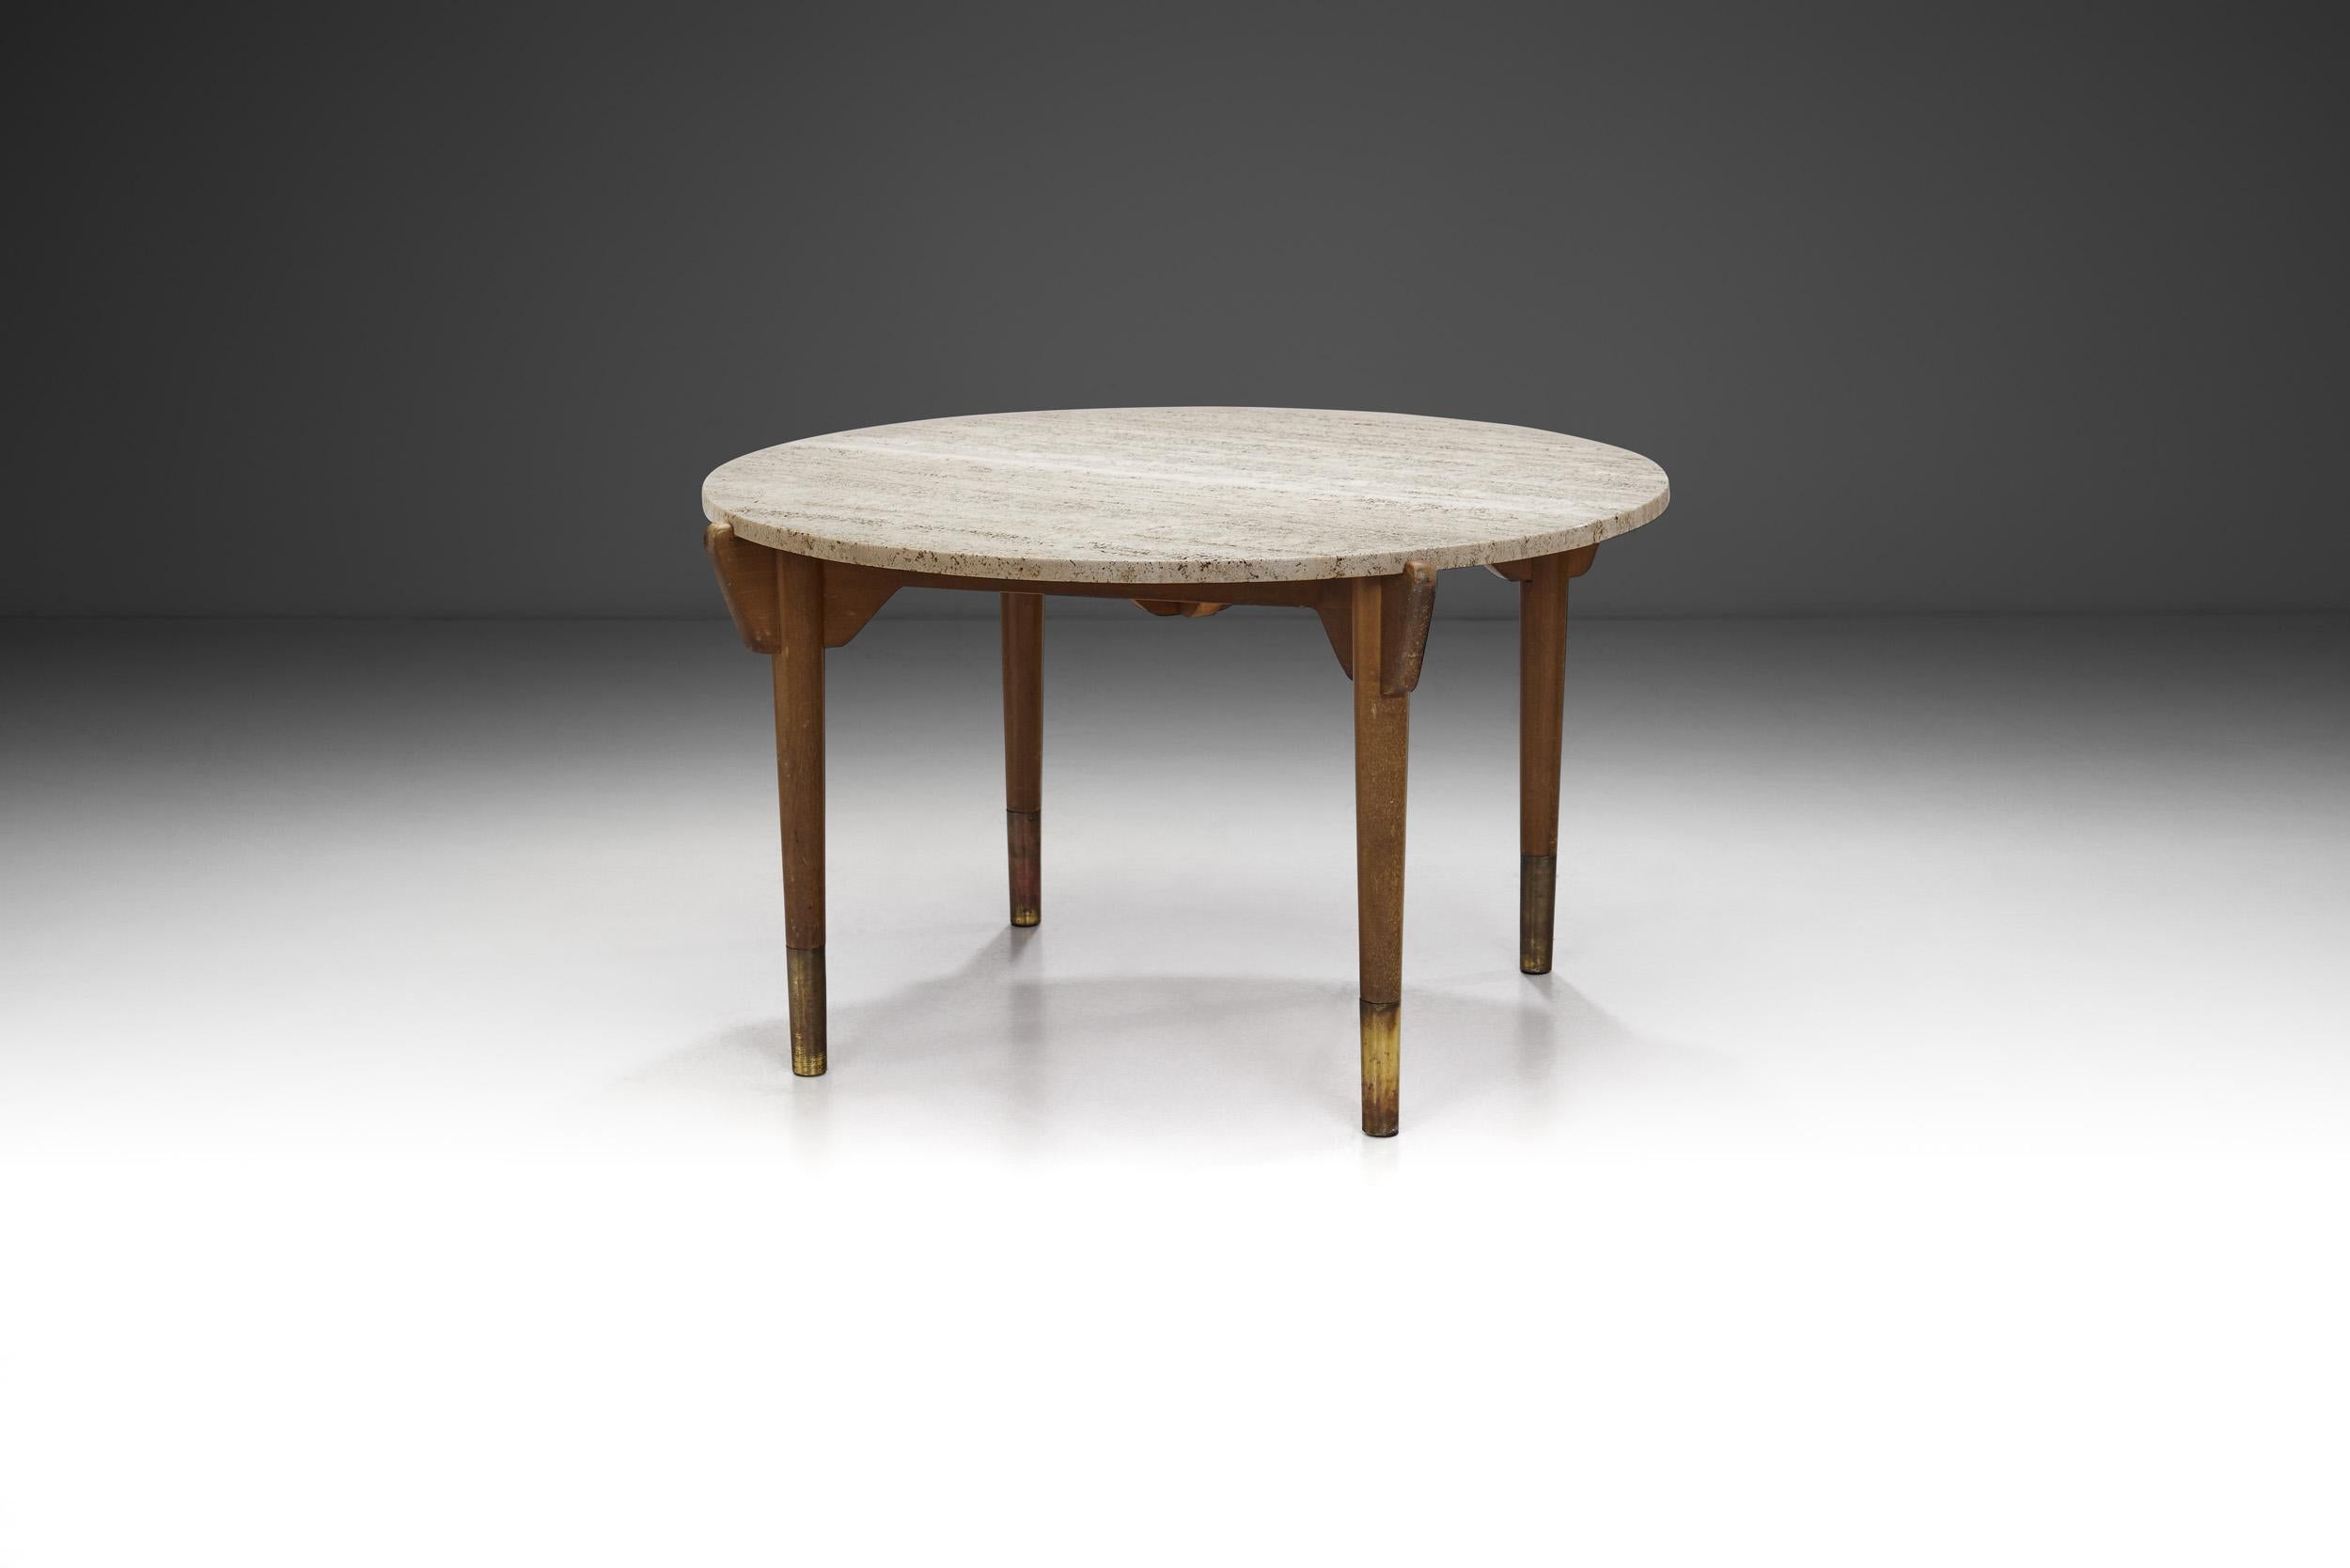 This Swedish Modern 1940s coffee table represents an exquisite blend of functionality, craftsmanship, and aesthetic appeal. Its base, crafted from stained beech, provides a sturdy foundation, while the round table-top in travertine adorned with